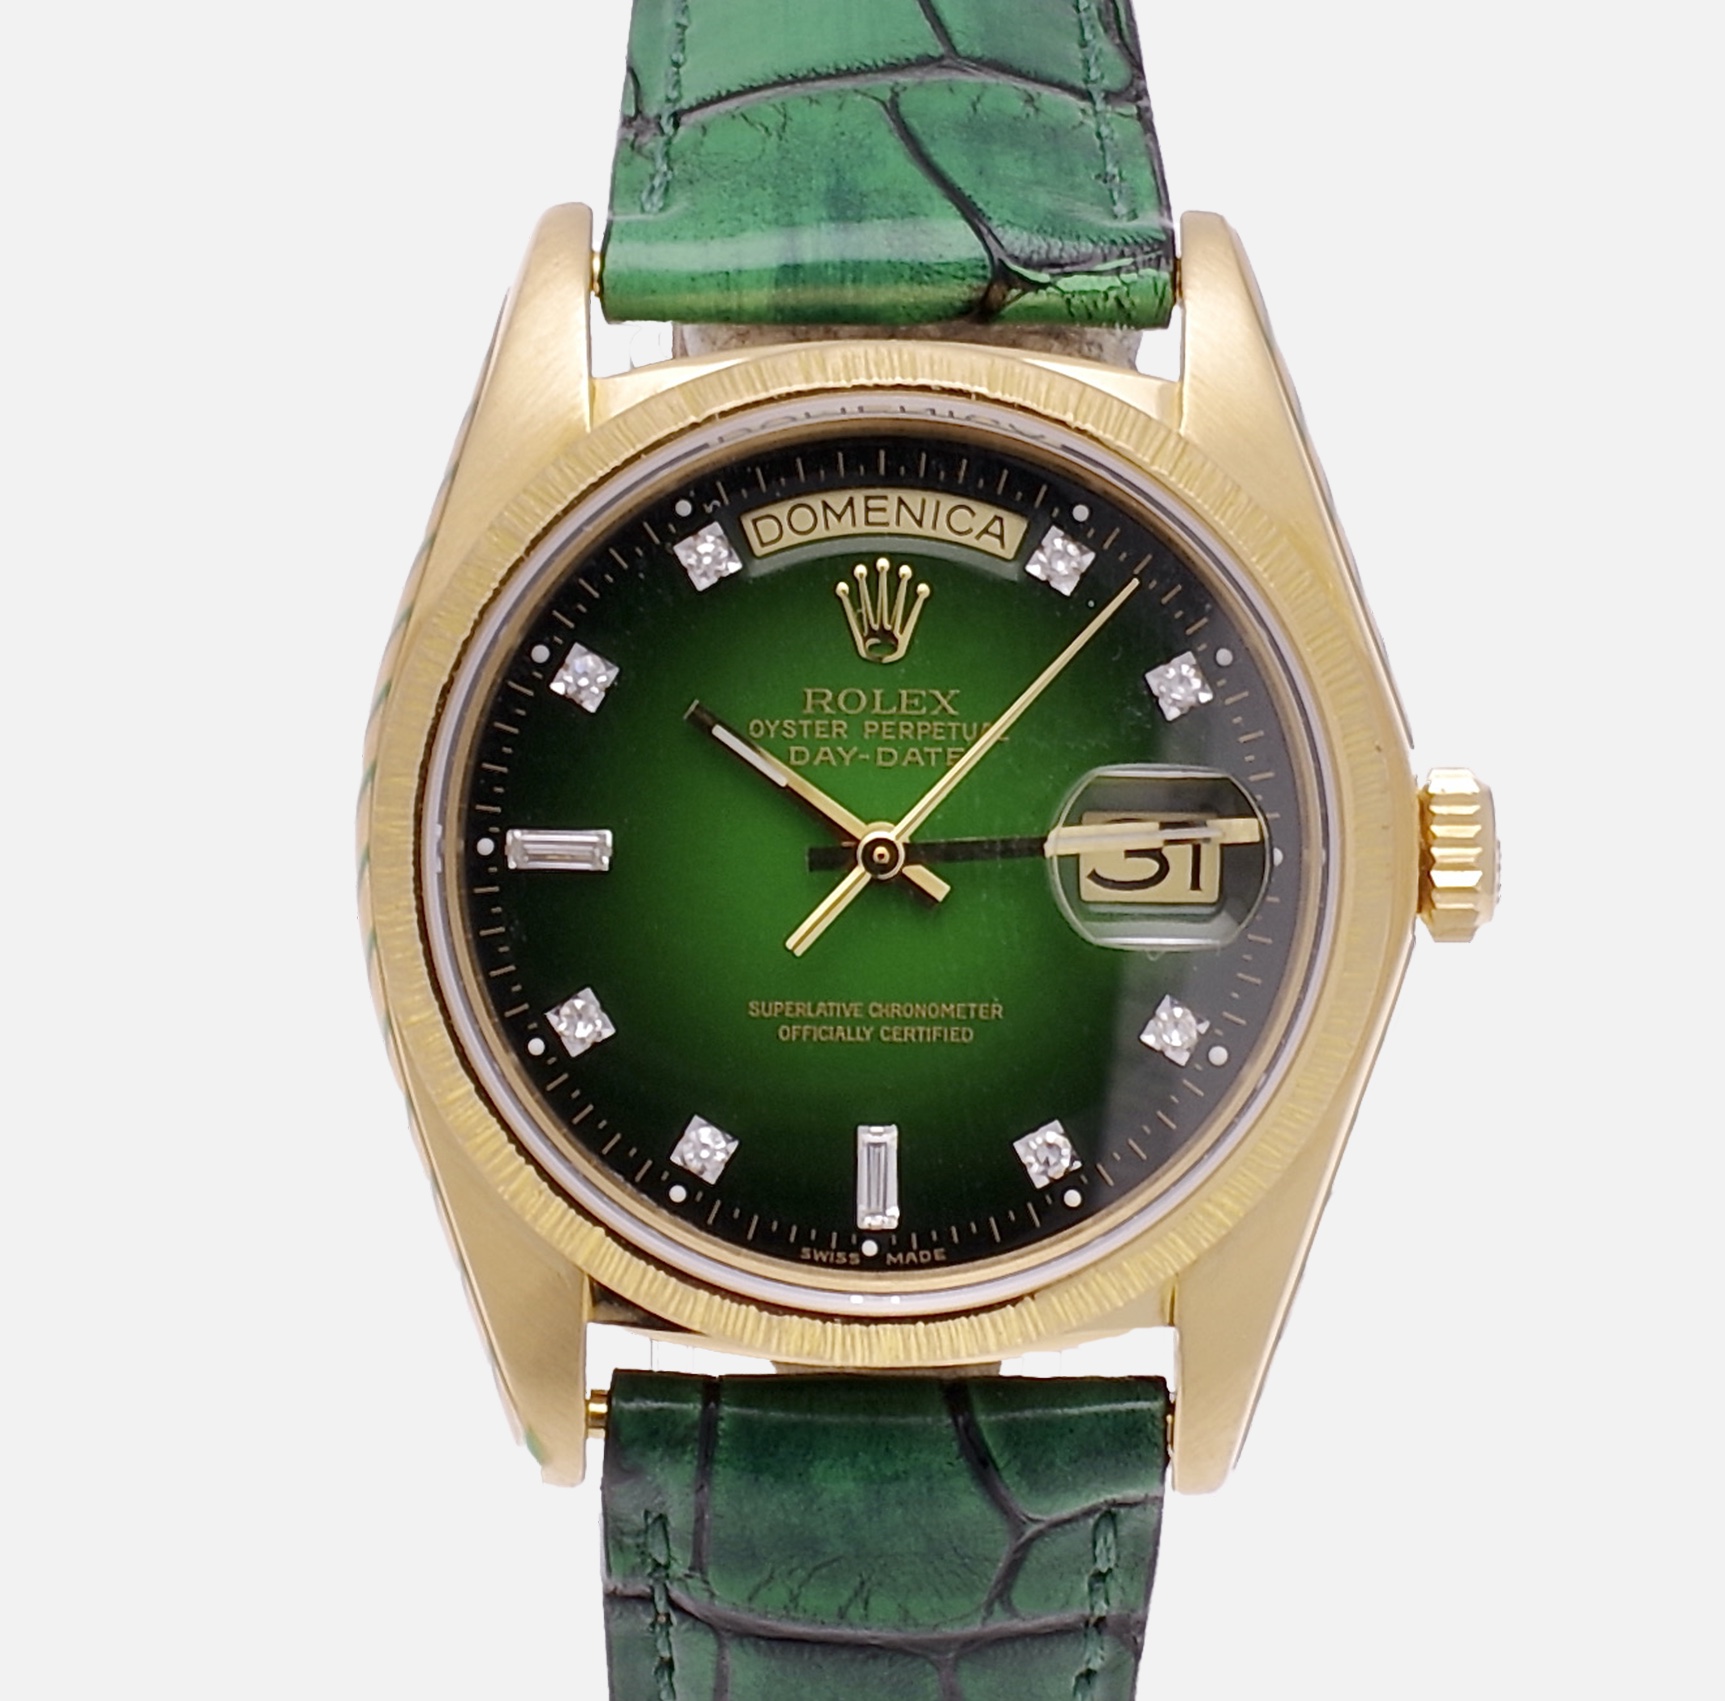 Rolex Day Date 18078 green dial 1978 